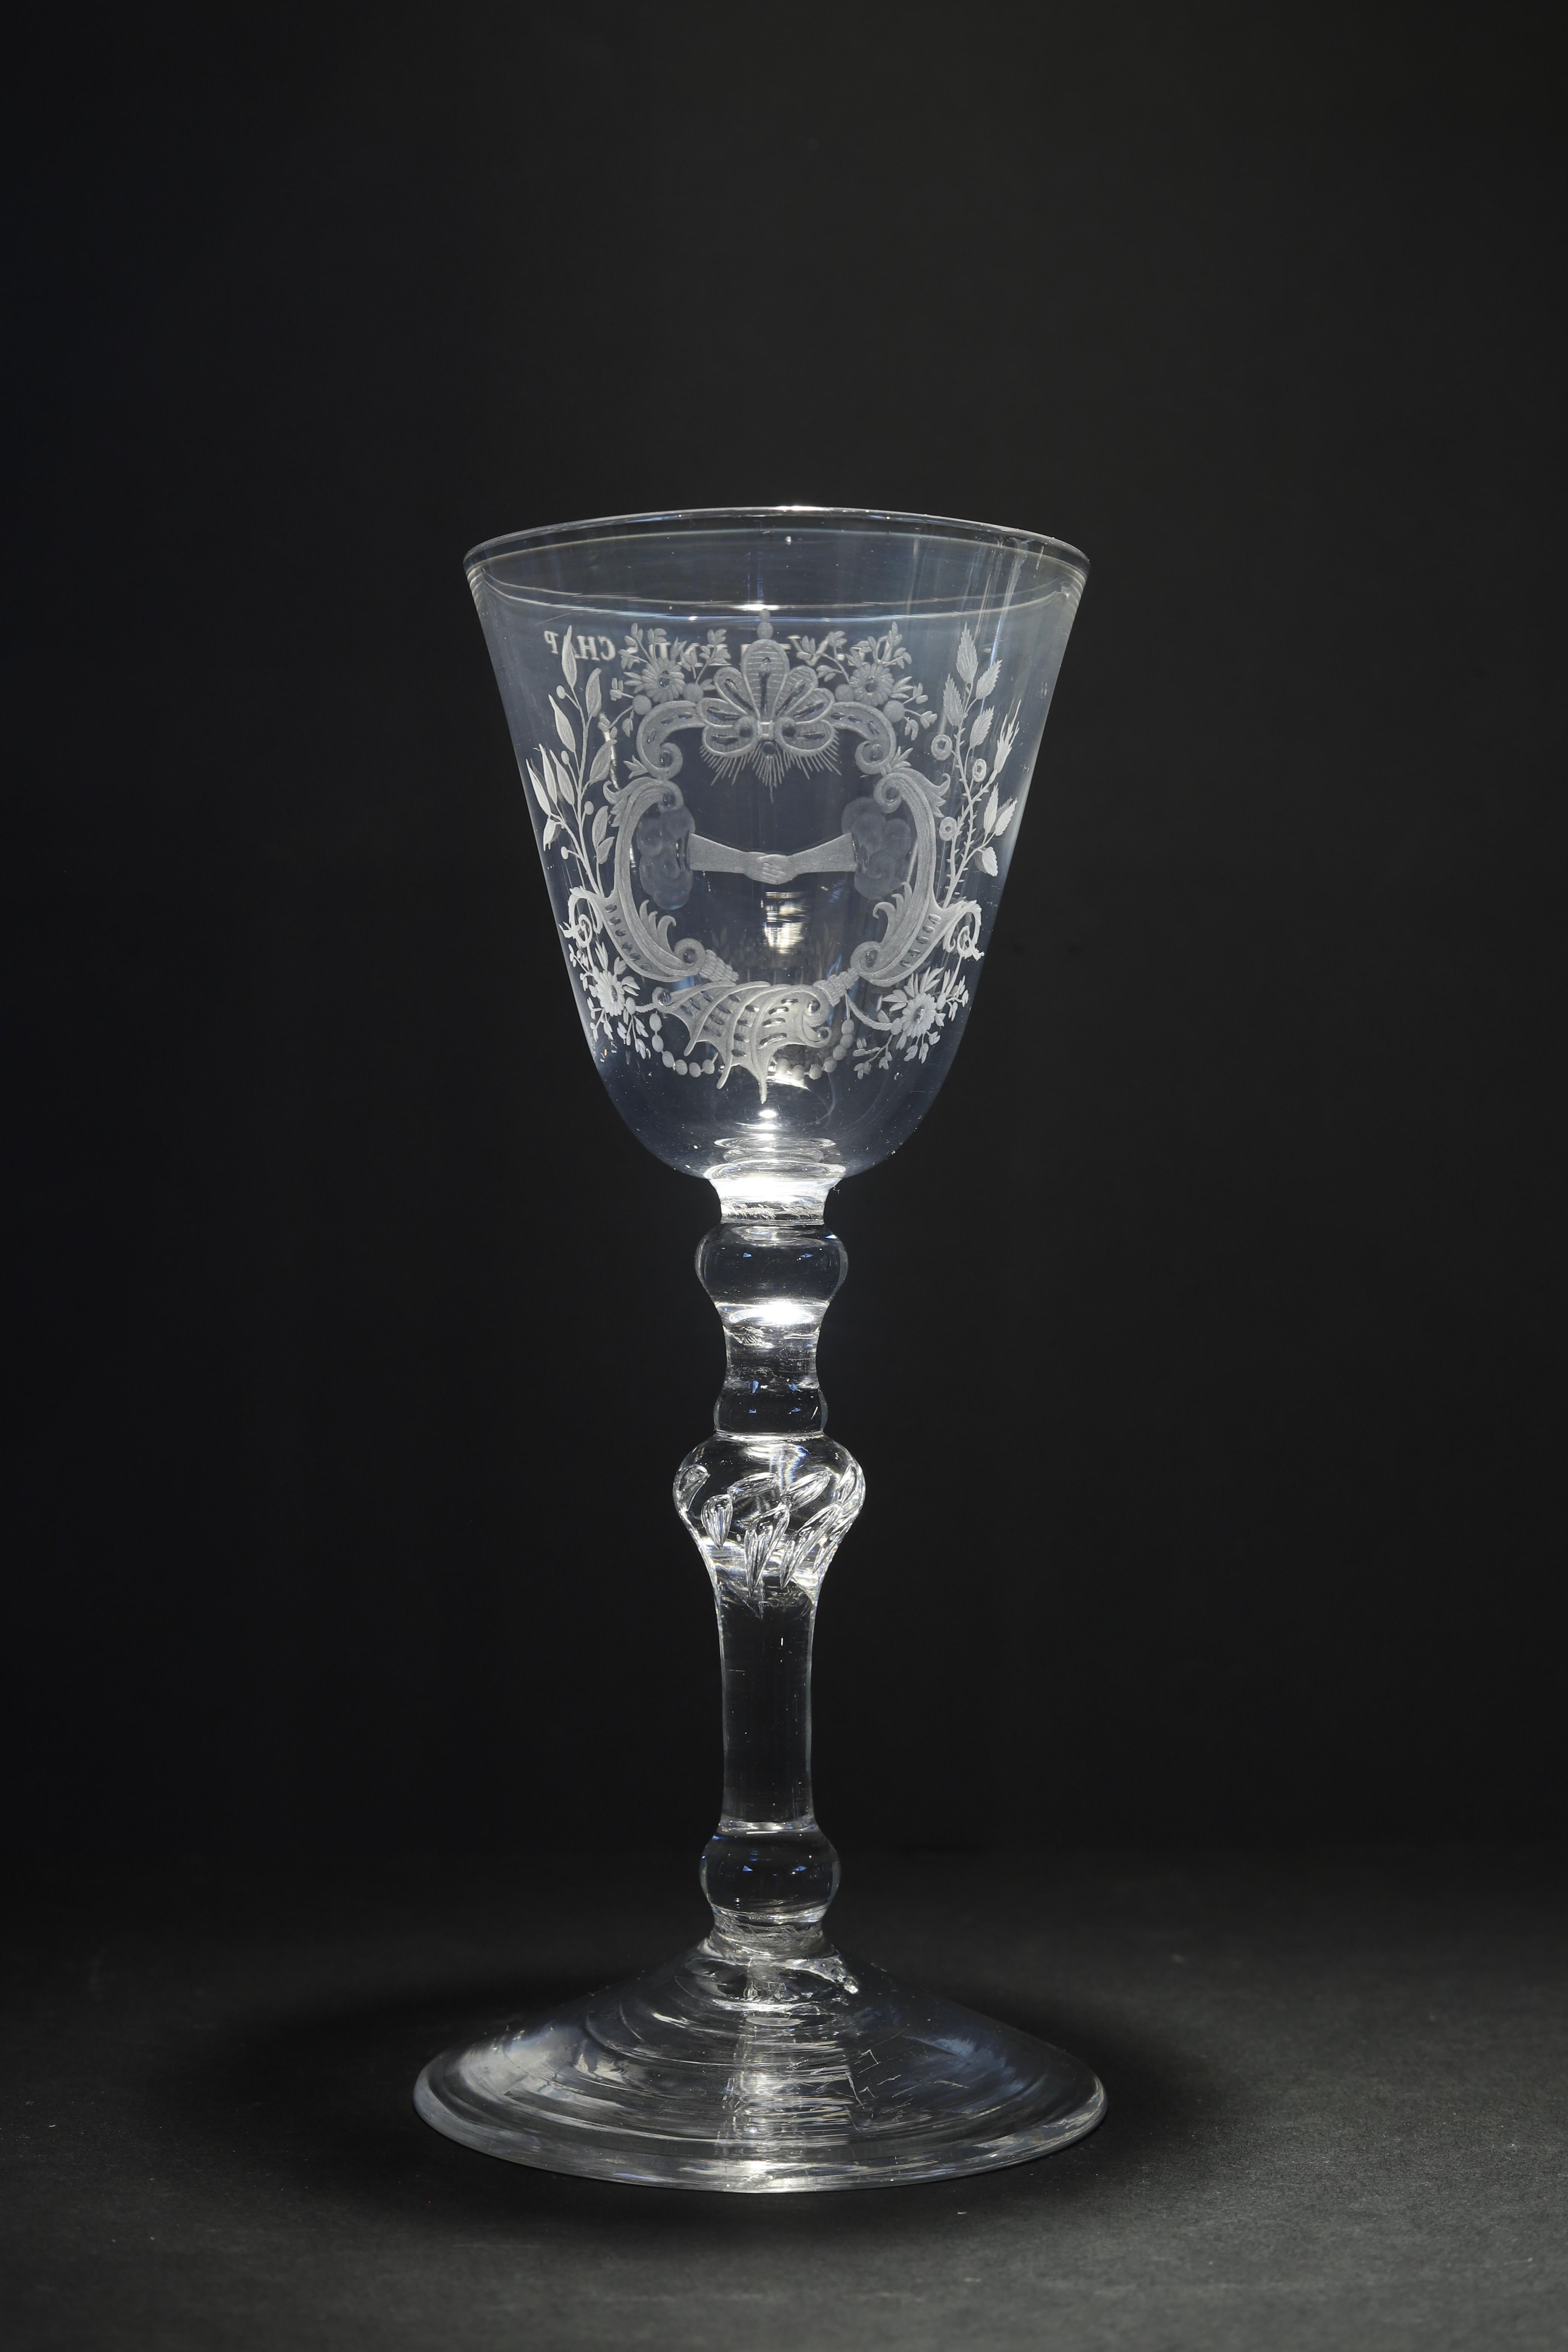 The Netherlands or England
Engraving: The Netherlands
Circa 1750

An elegant Newcastle? Dutch engraved baluster glass with a fine engraving of two shaking hands in a Rococo-style cartouche symbolizing friendship. 
On the back: De Vriendschap: The